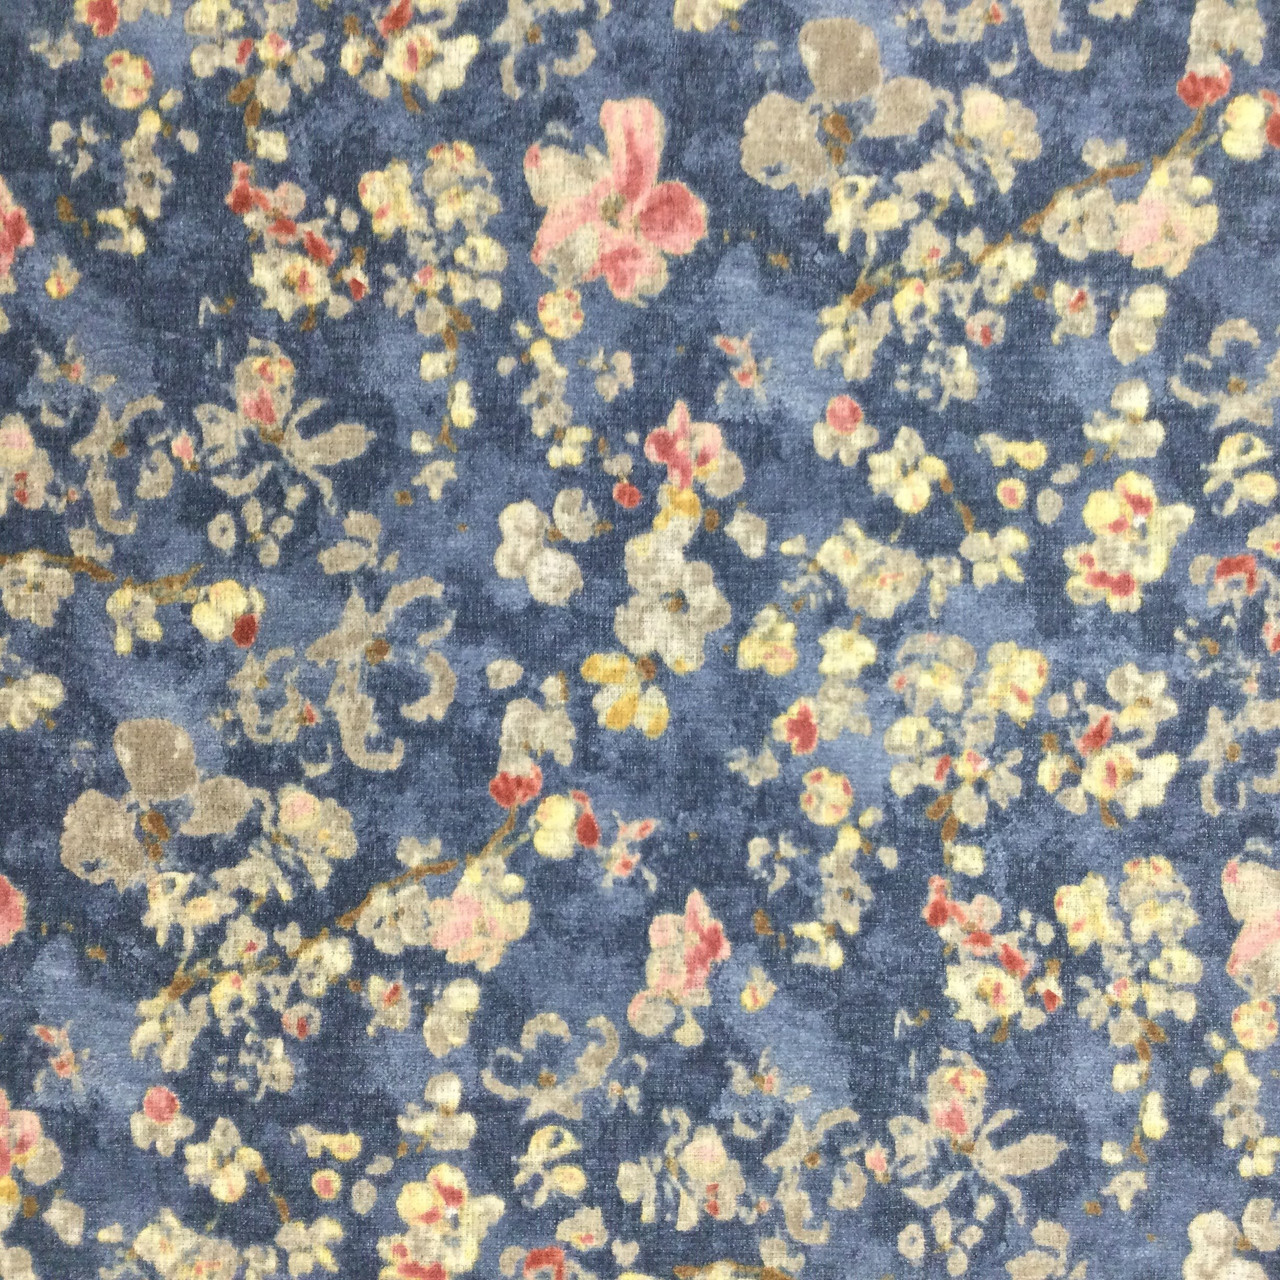 Contemporary Floral Print Fabric in Blue / Beige / Pink / Red / Yellow |  Upholstery / Drapery | Medium Weight | 54 Wide | By the Yard | Brakenbar  in